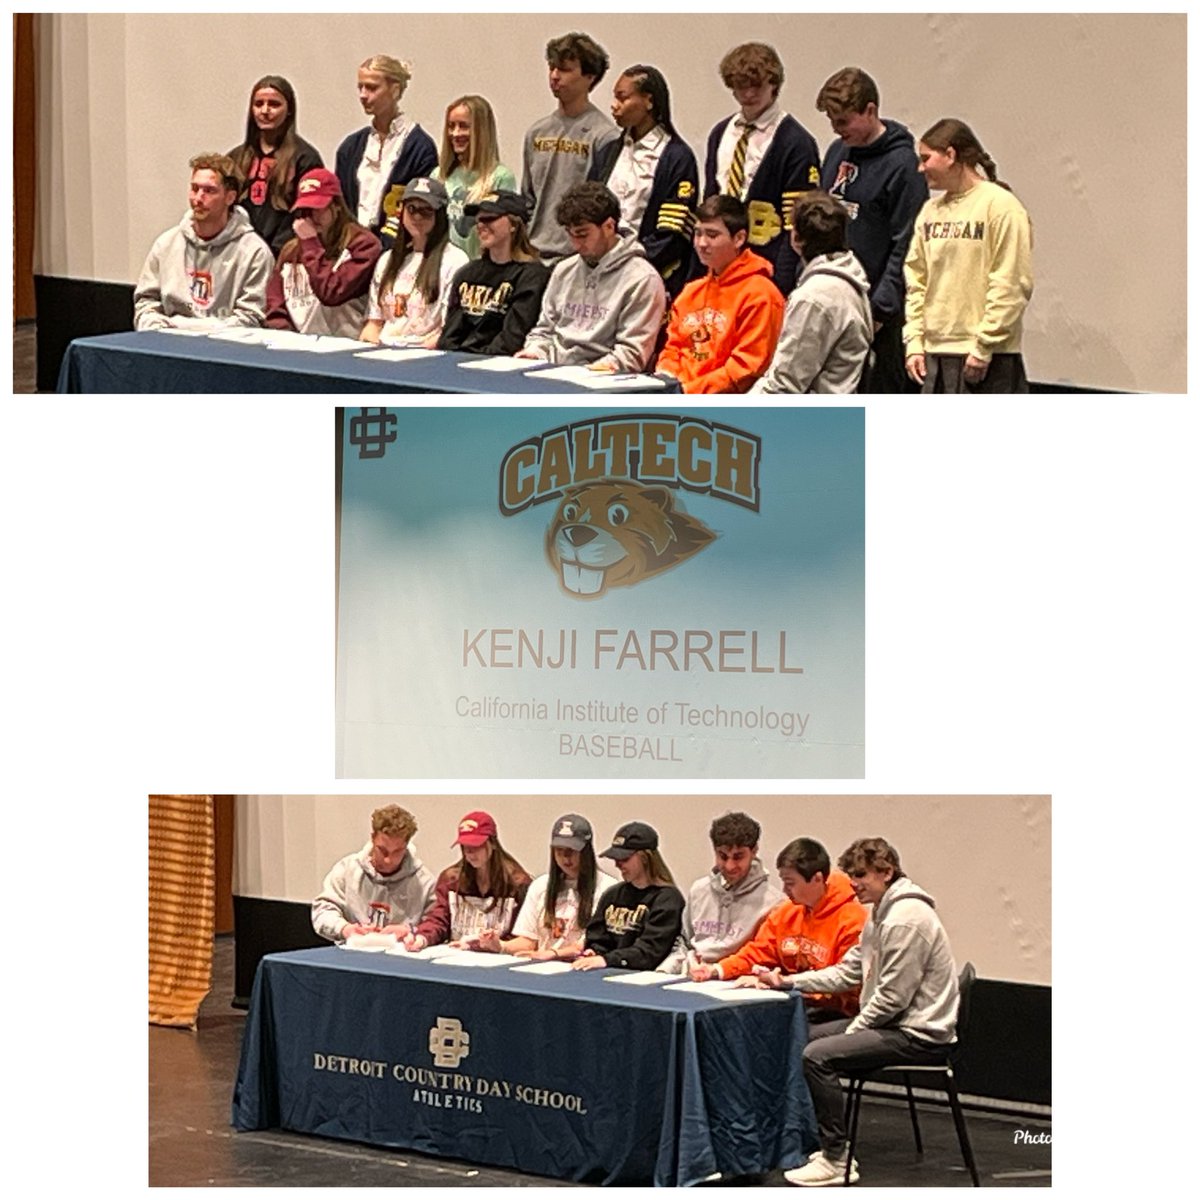 Congrats to Kenji Farrell as he makes it official!! He will be continuing his academic and baseball career at @caltechbaseball! Great person who put a lot of work both in the classroom and on the field. @DCDSAthletics @CDSportsAcademy